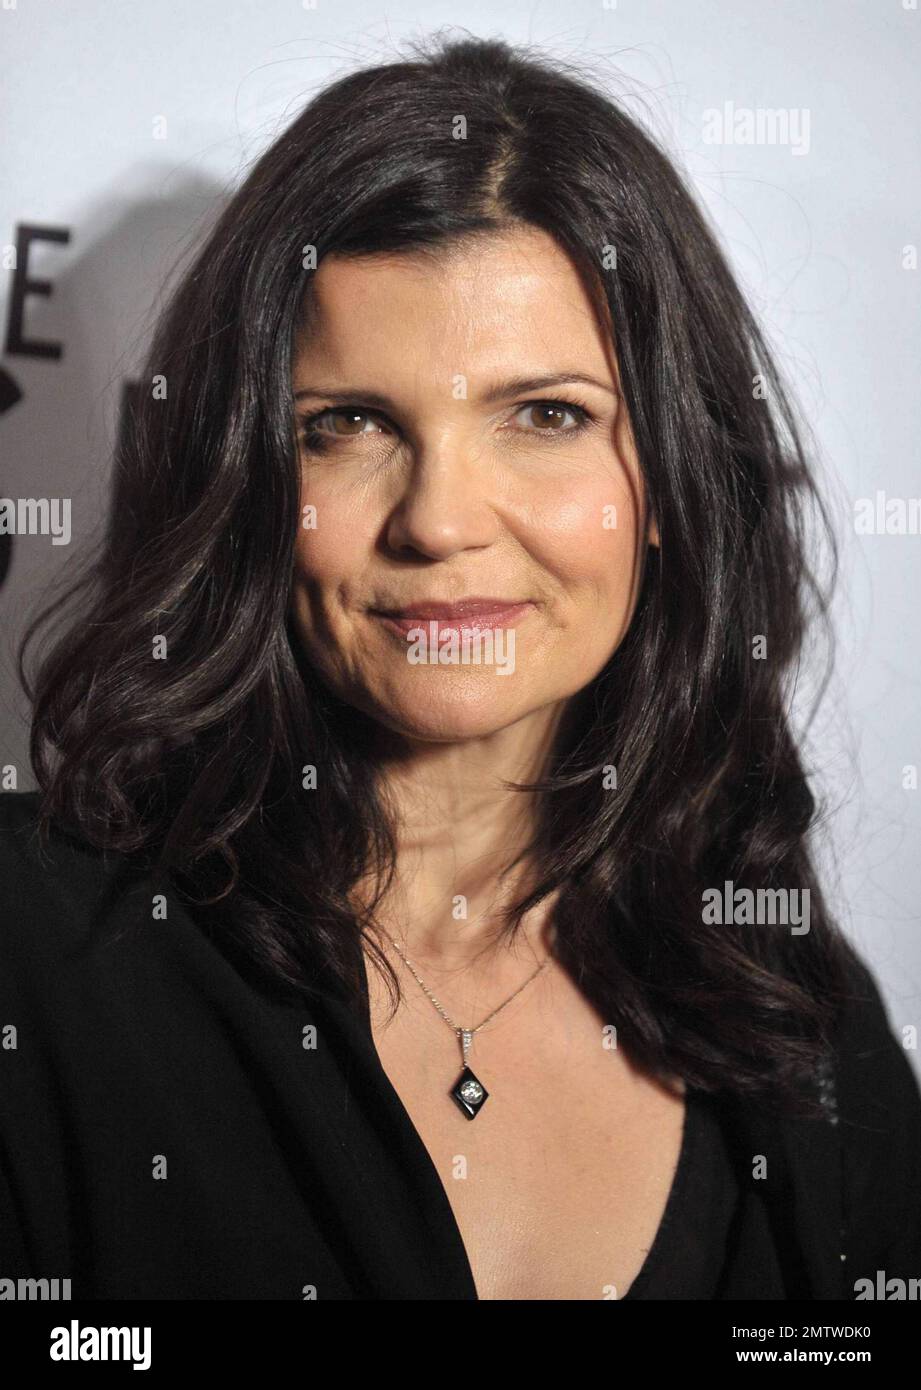 Ali Hewson arrives at The Ace Hotel for the premiere of 'The Lazarus Effect', a public awareness film presented by HBO and directed by photographer Brigitte Lacombe.  The film is part of a larger campaign spearheaded by (Red), the consumer-driven fundraising brand designed to pool funds for those affected by AIDS in Africa.  'The Lazarus Effect' features celebrities such as Hugh Jackman, Penelope Cruz, Benicio Del Toro and (Red) co-founder Bono showing off what they can buy for 40 cents. New York, NY. 05/04/10.   . Stock Photo